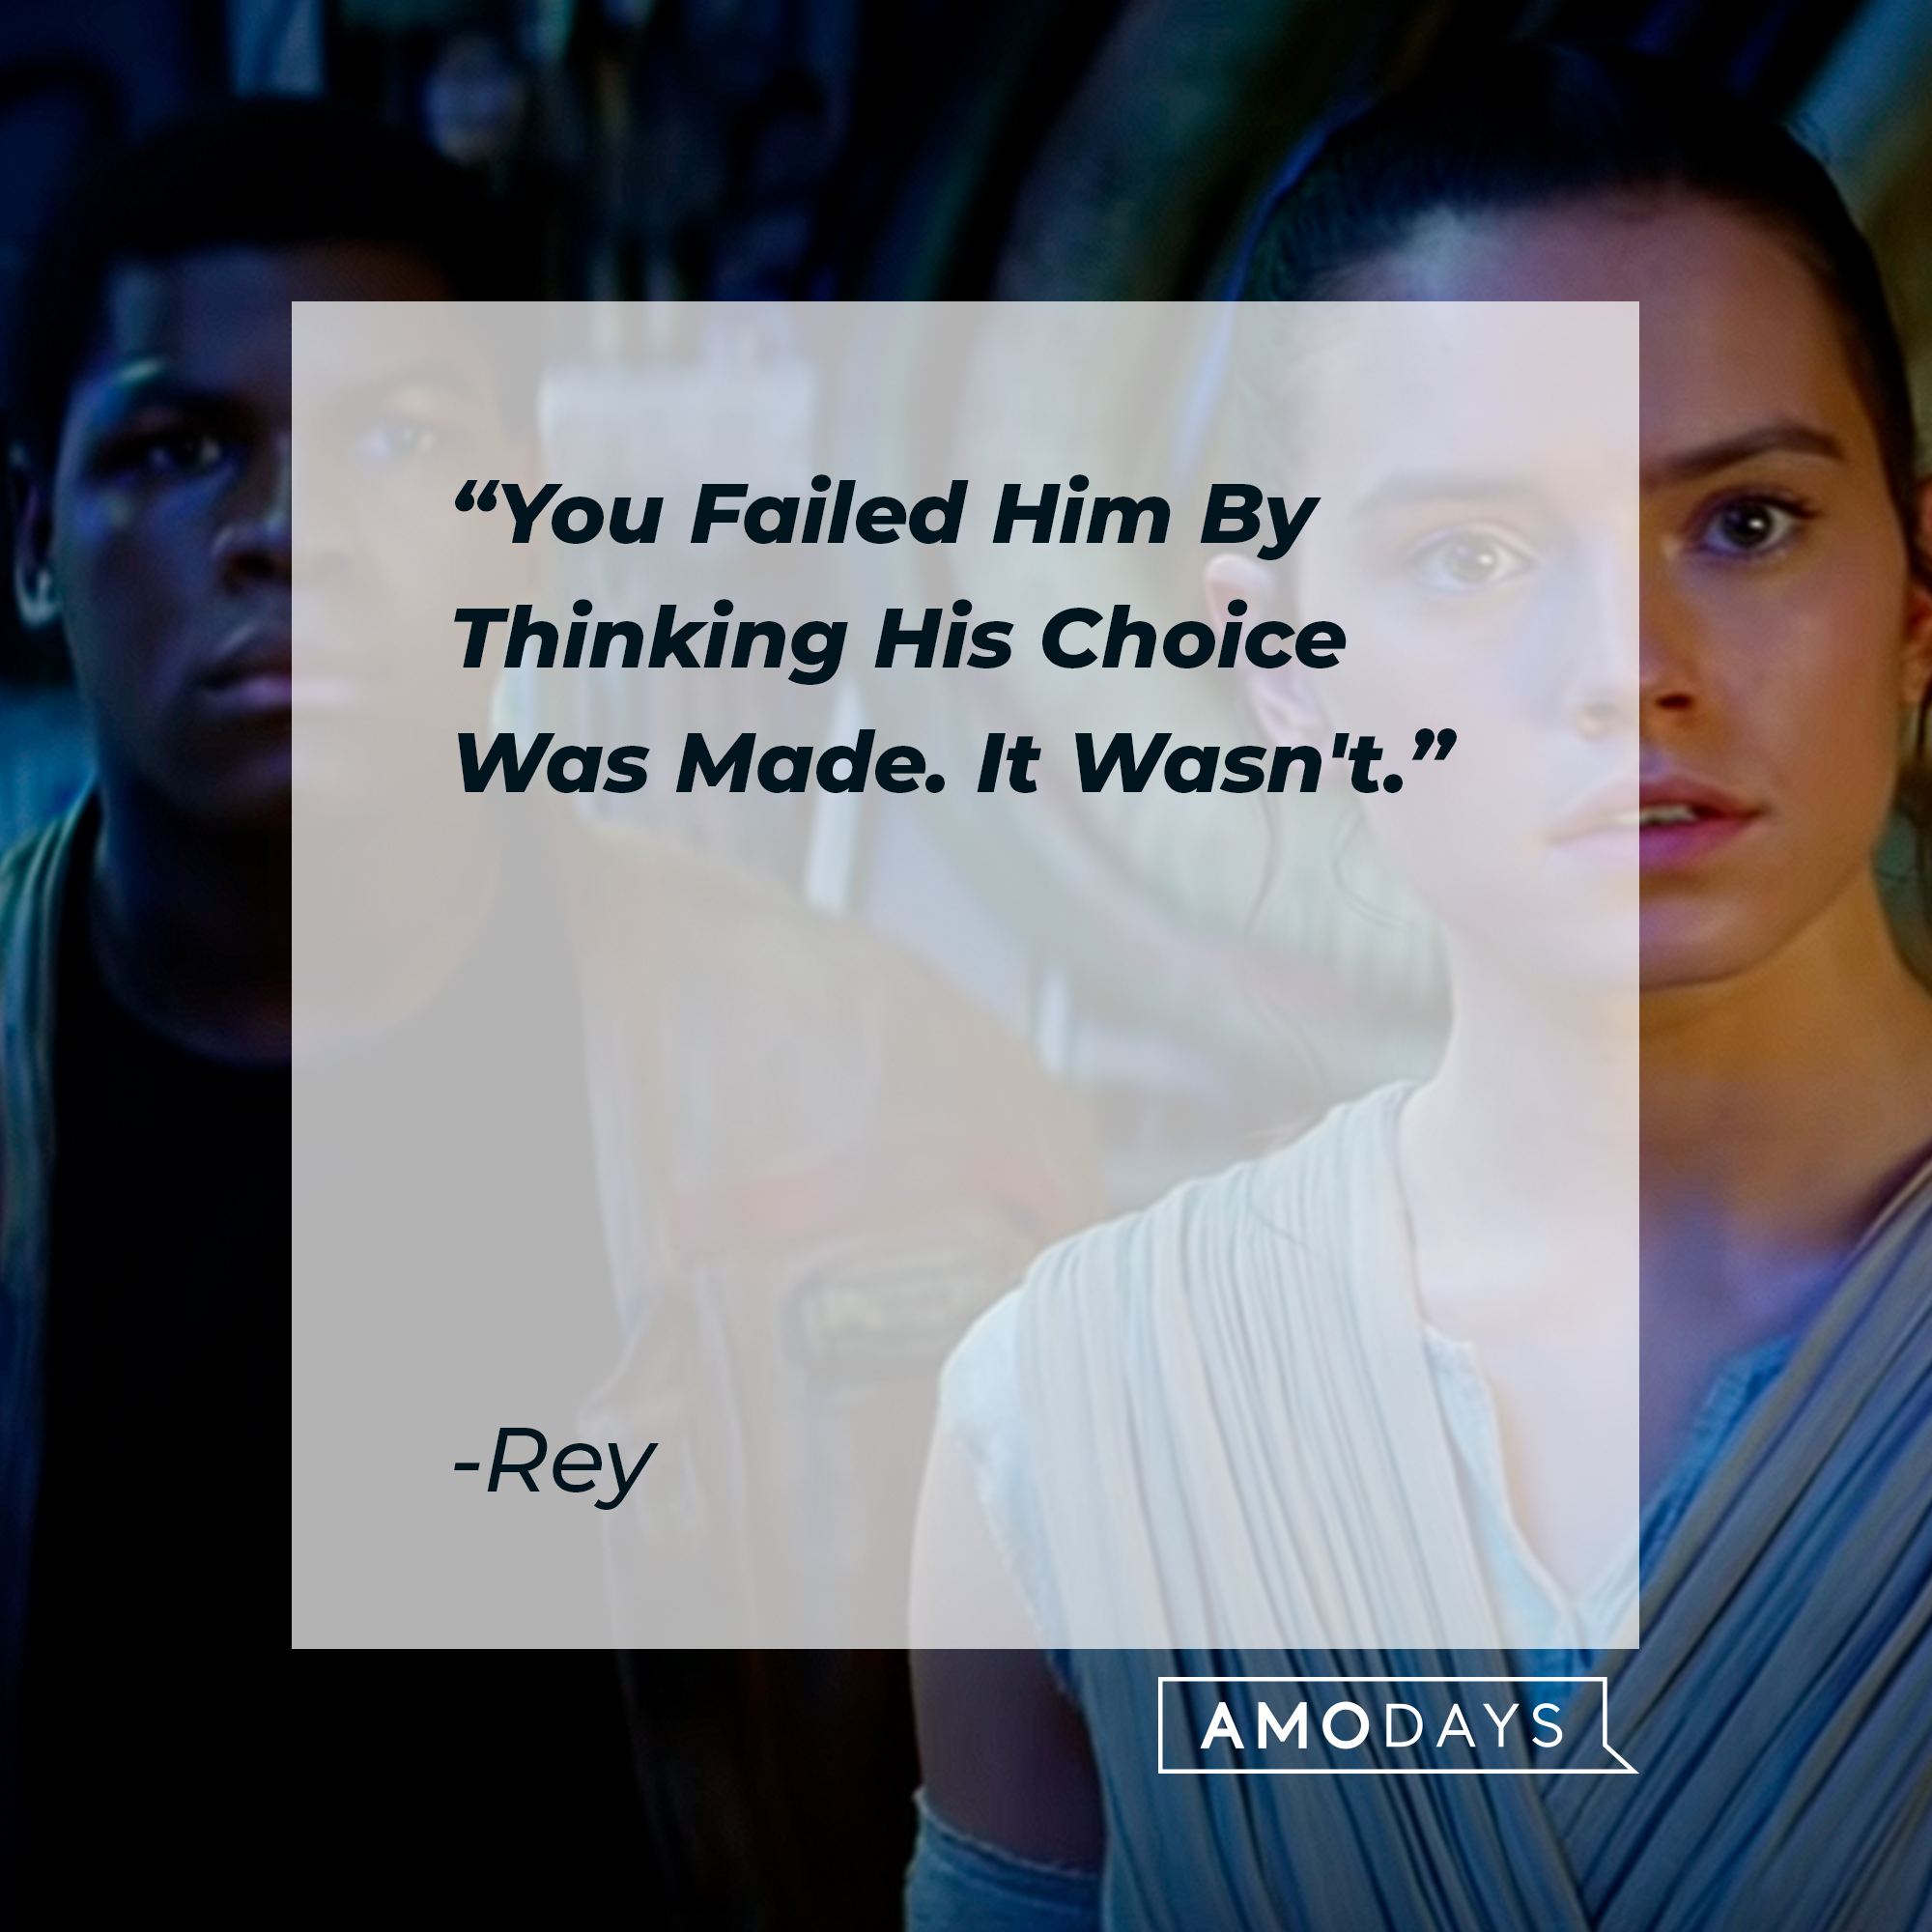 Rey's quote: "You Failed Him By Thinking His Choice Was Made. It Wasn't."┃Source: youtube.com/StarWars